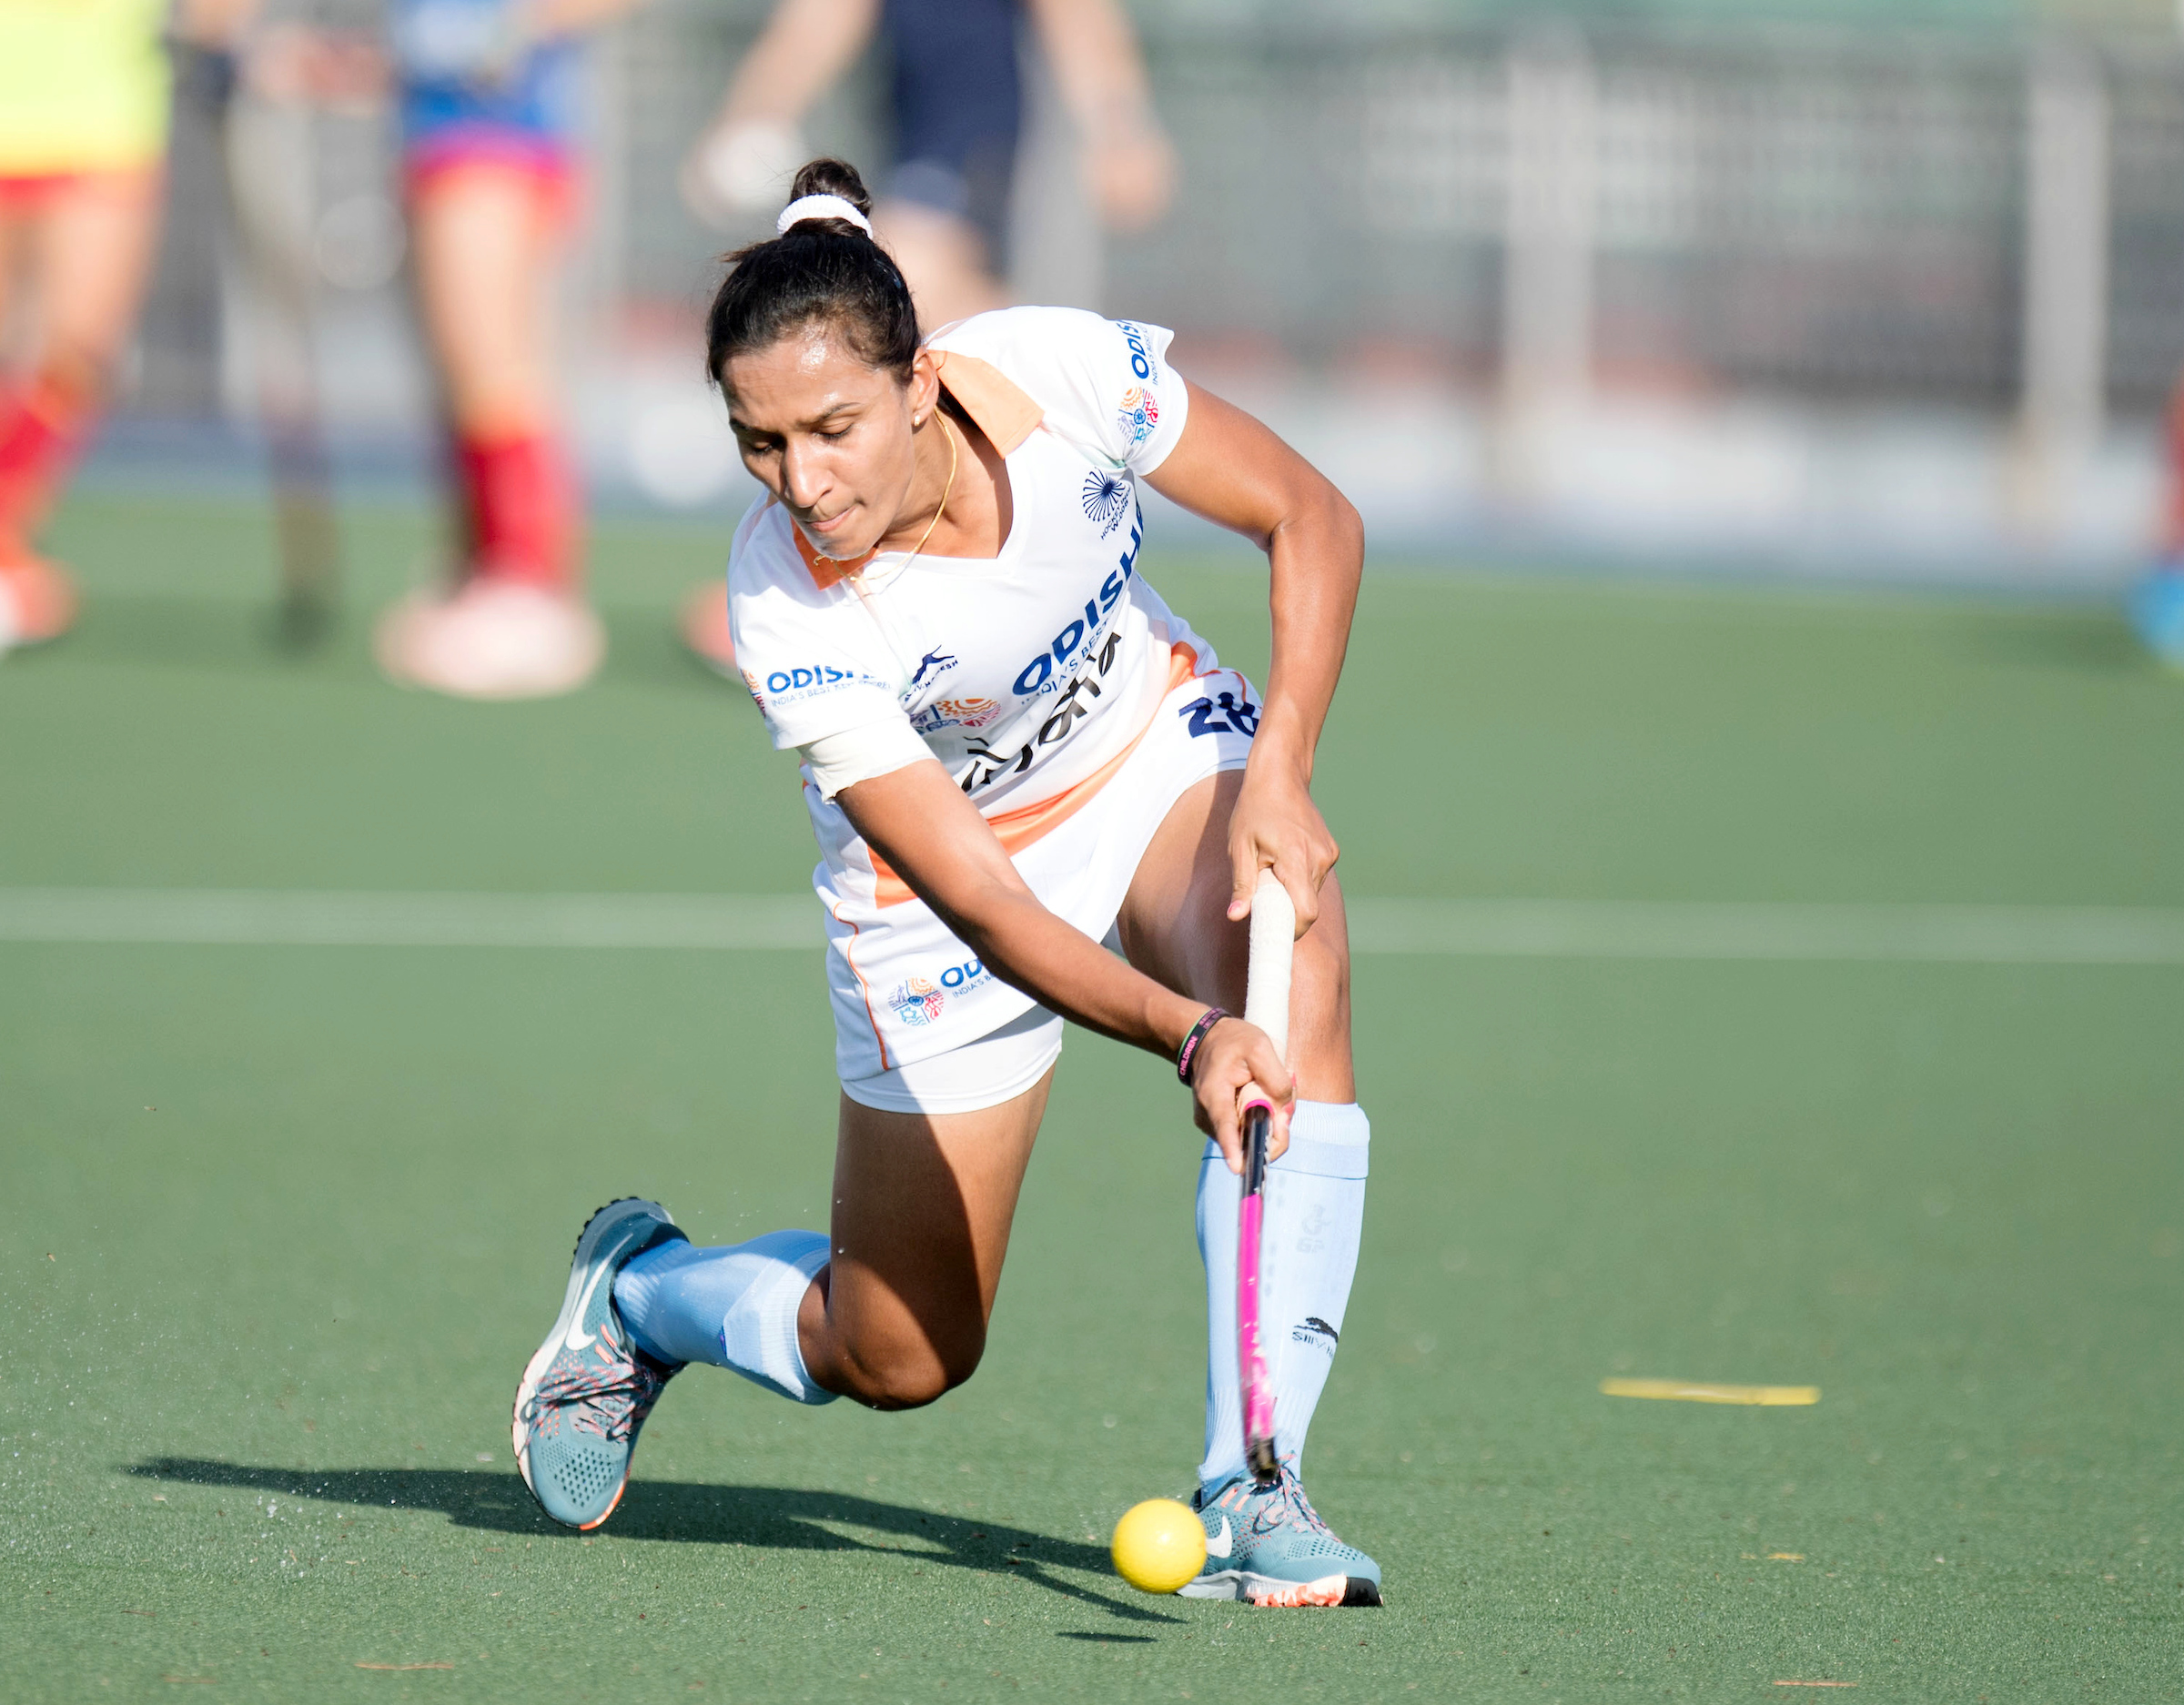 Rani Rampal targets Olympic qualification for Indian women’s hockey team